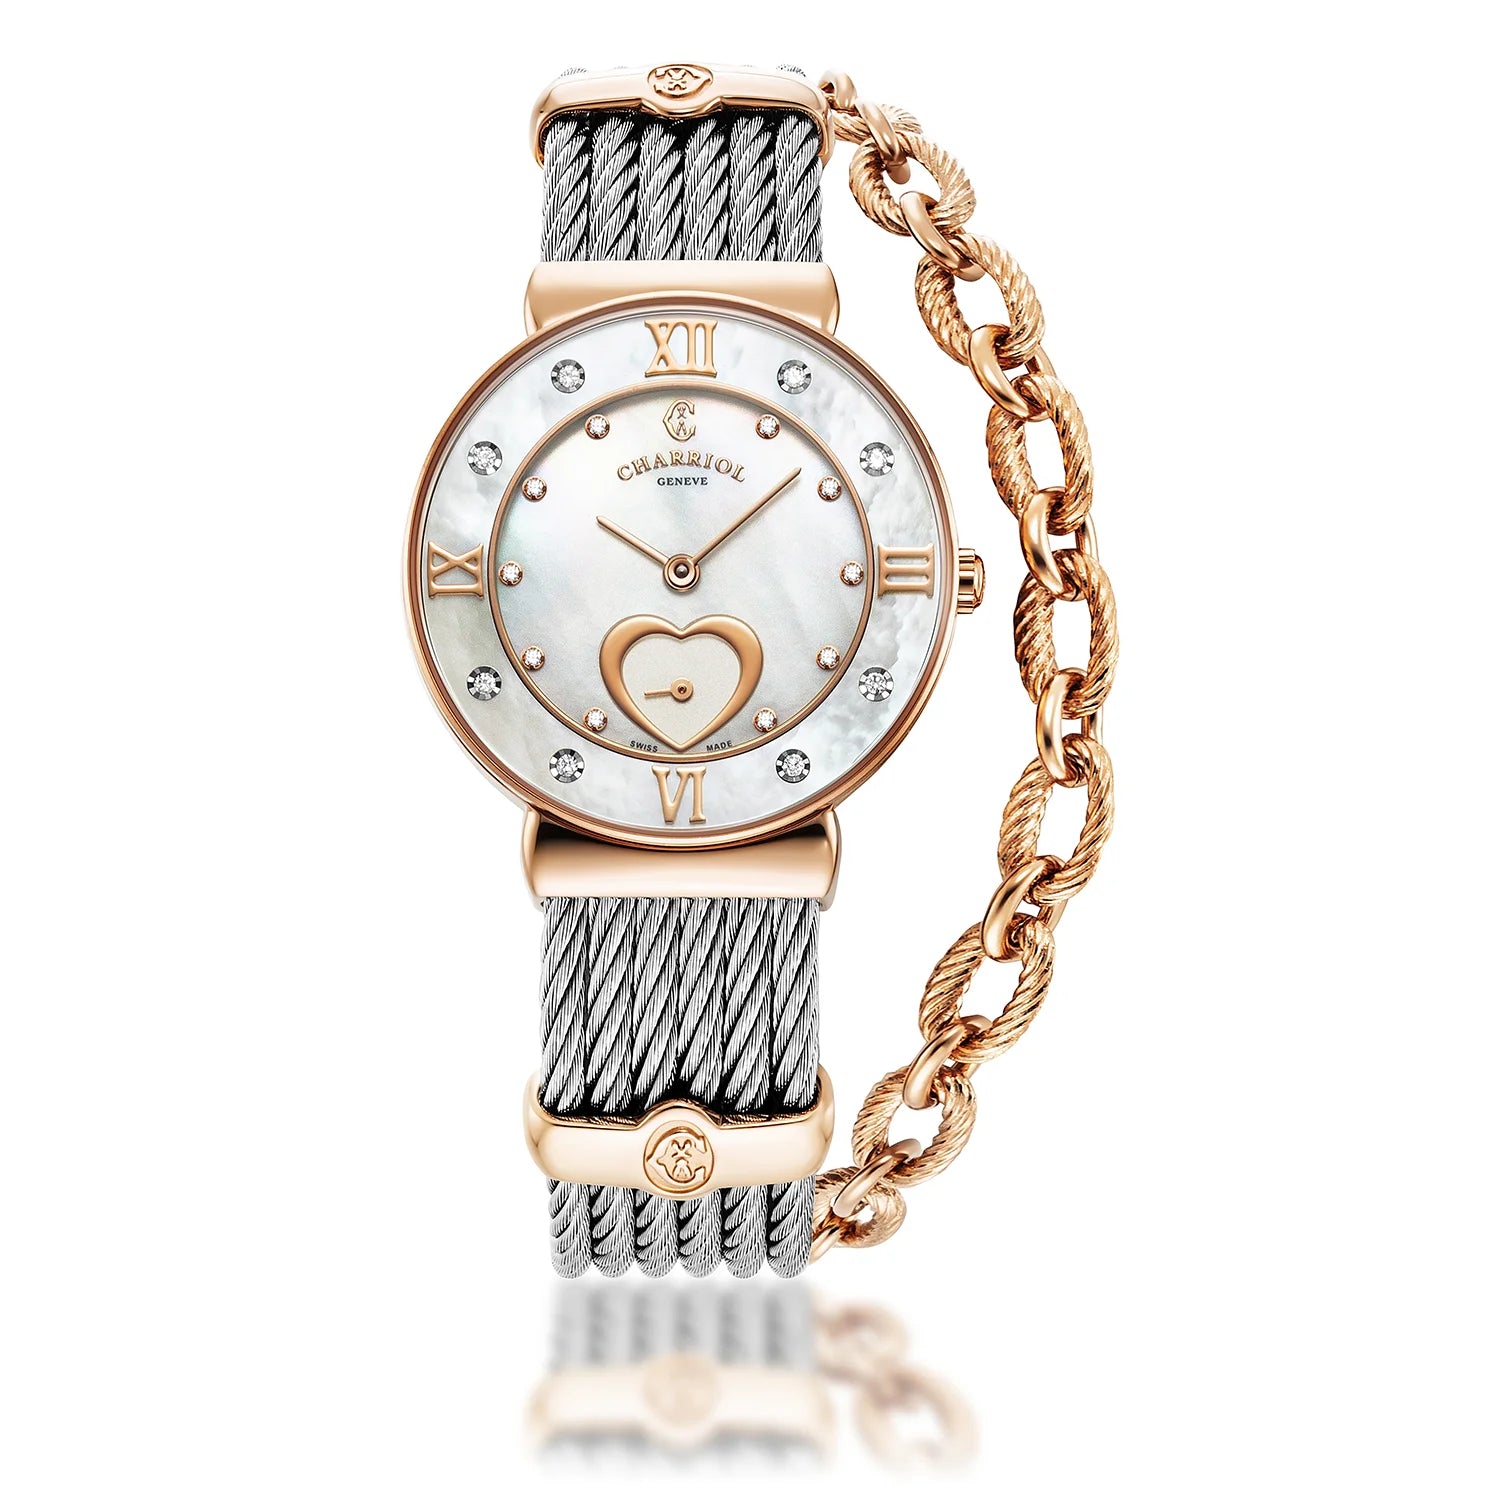 ST TROPEZ ICON, 30MM, QUARTZ CALIBRE, MOTHER-OF-PEARL HEART DIAL, MOTHER-OF-PEARL WITH 8 DIAMONDS BEZEL, STEEL CABLE BRACELET - Charriol Geneve -  Watch